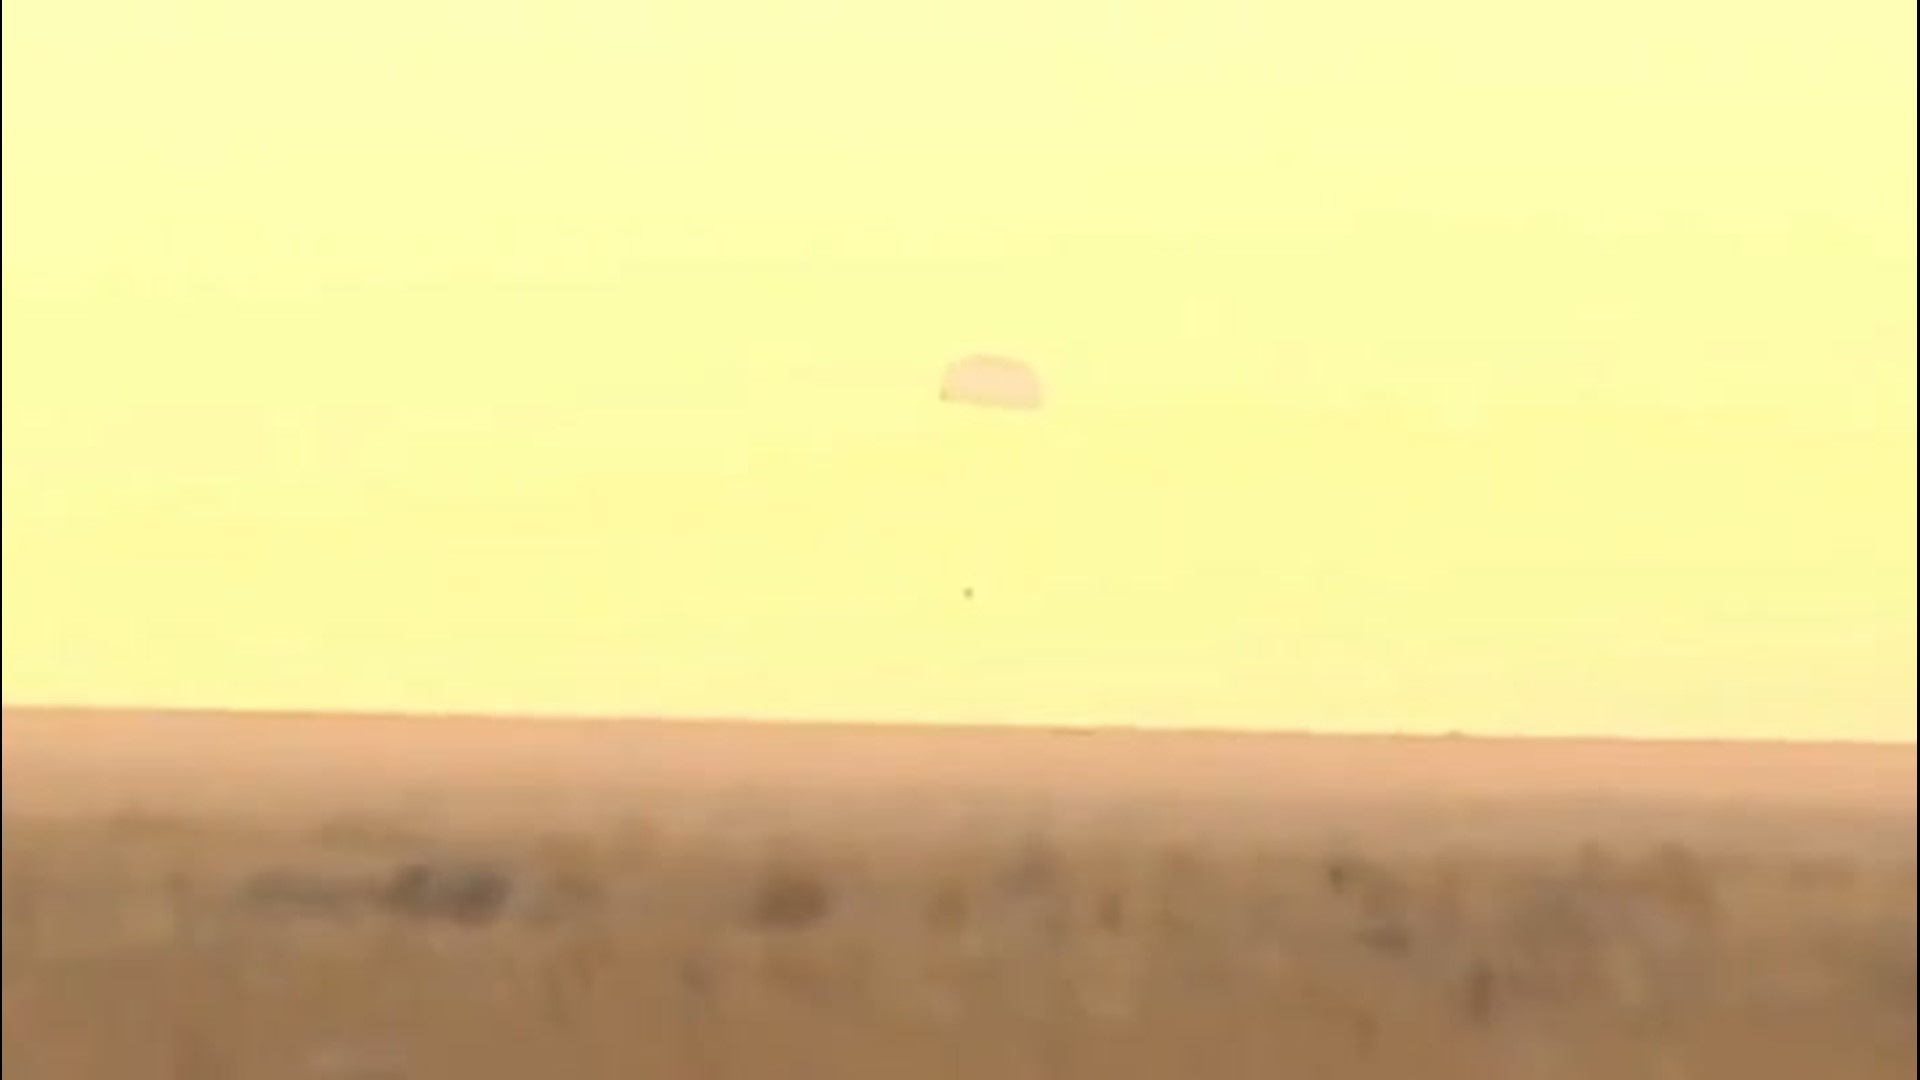 Three astronauts returned to Earth on Oct. 22, landing in Qaraghandy, Kazakhstan, after spending six months aboard the International Space Station.